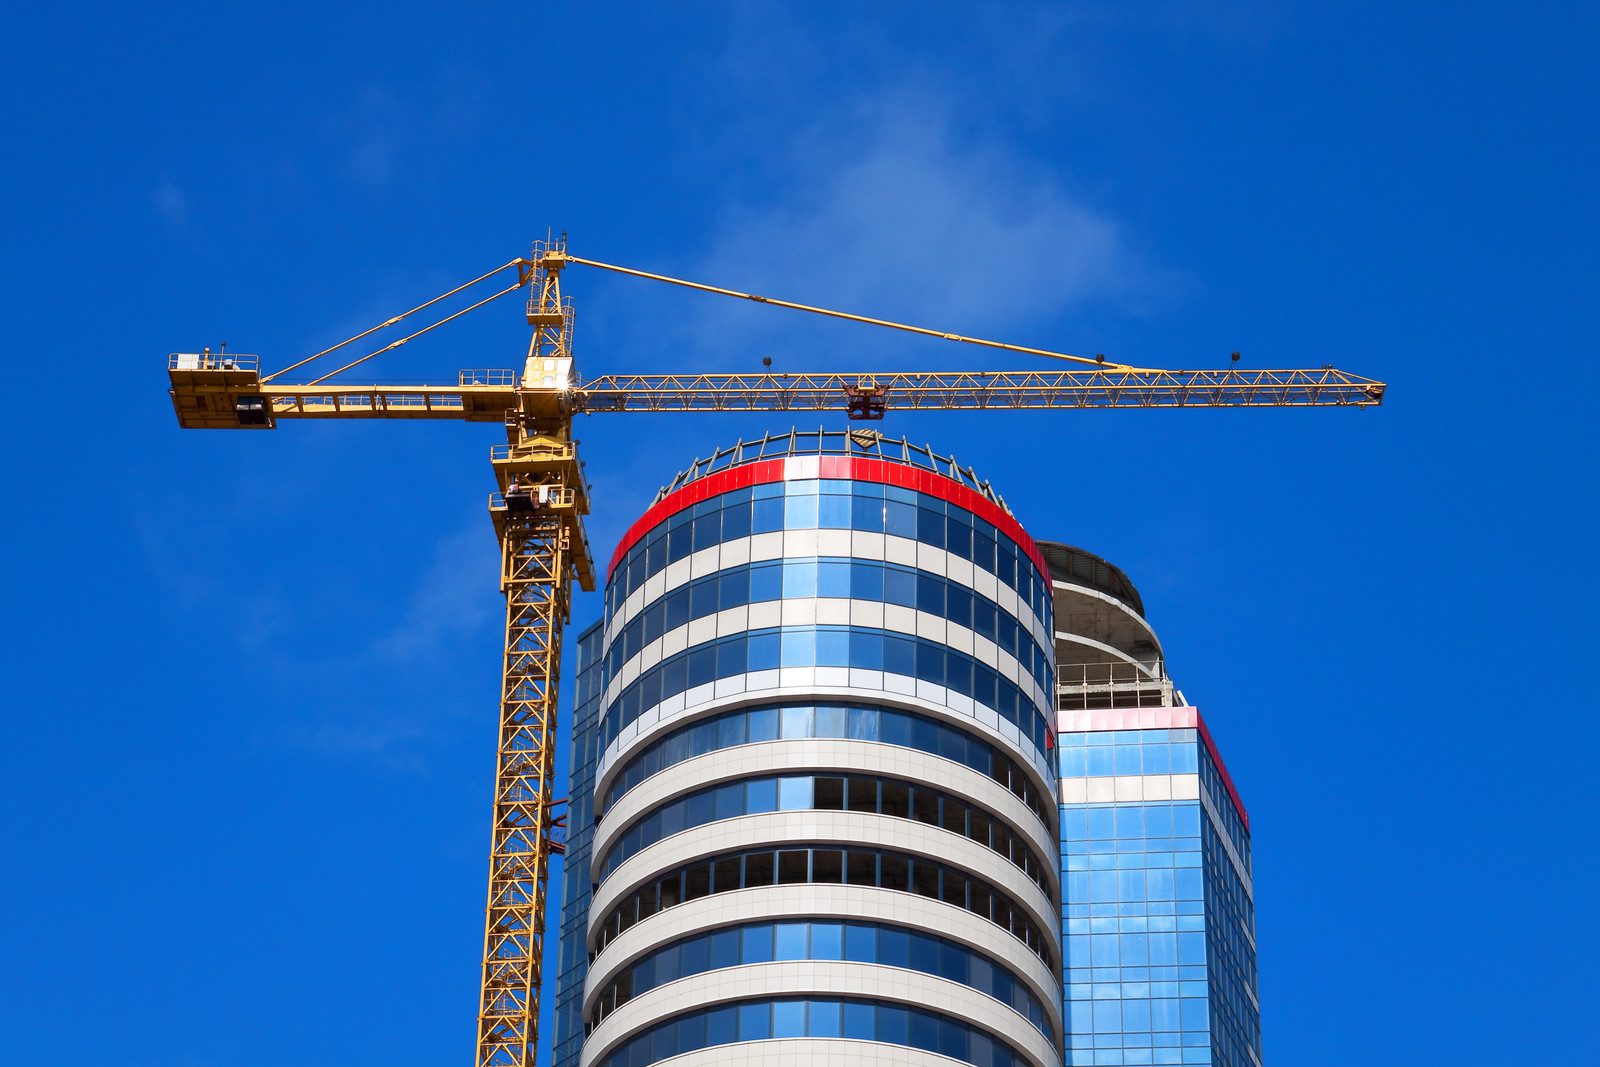 aluminium panels for construction showing a high rise circular building with crane